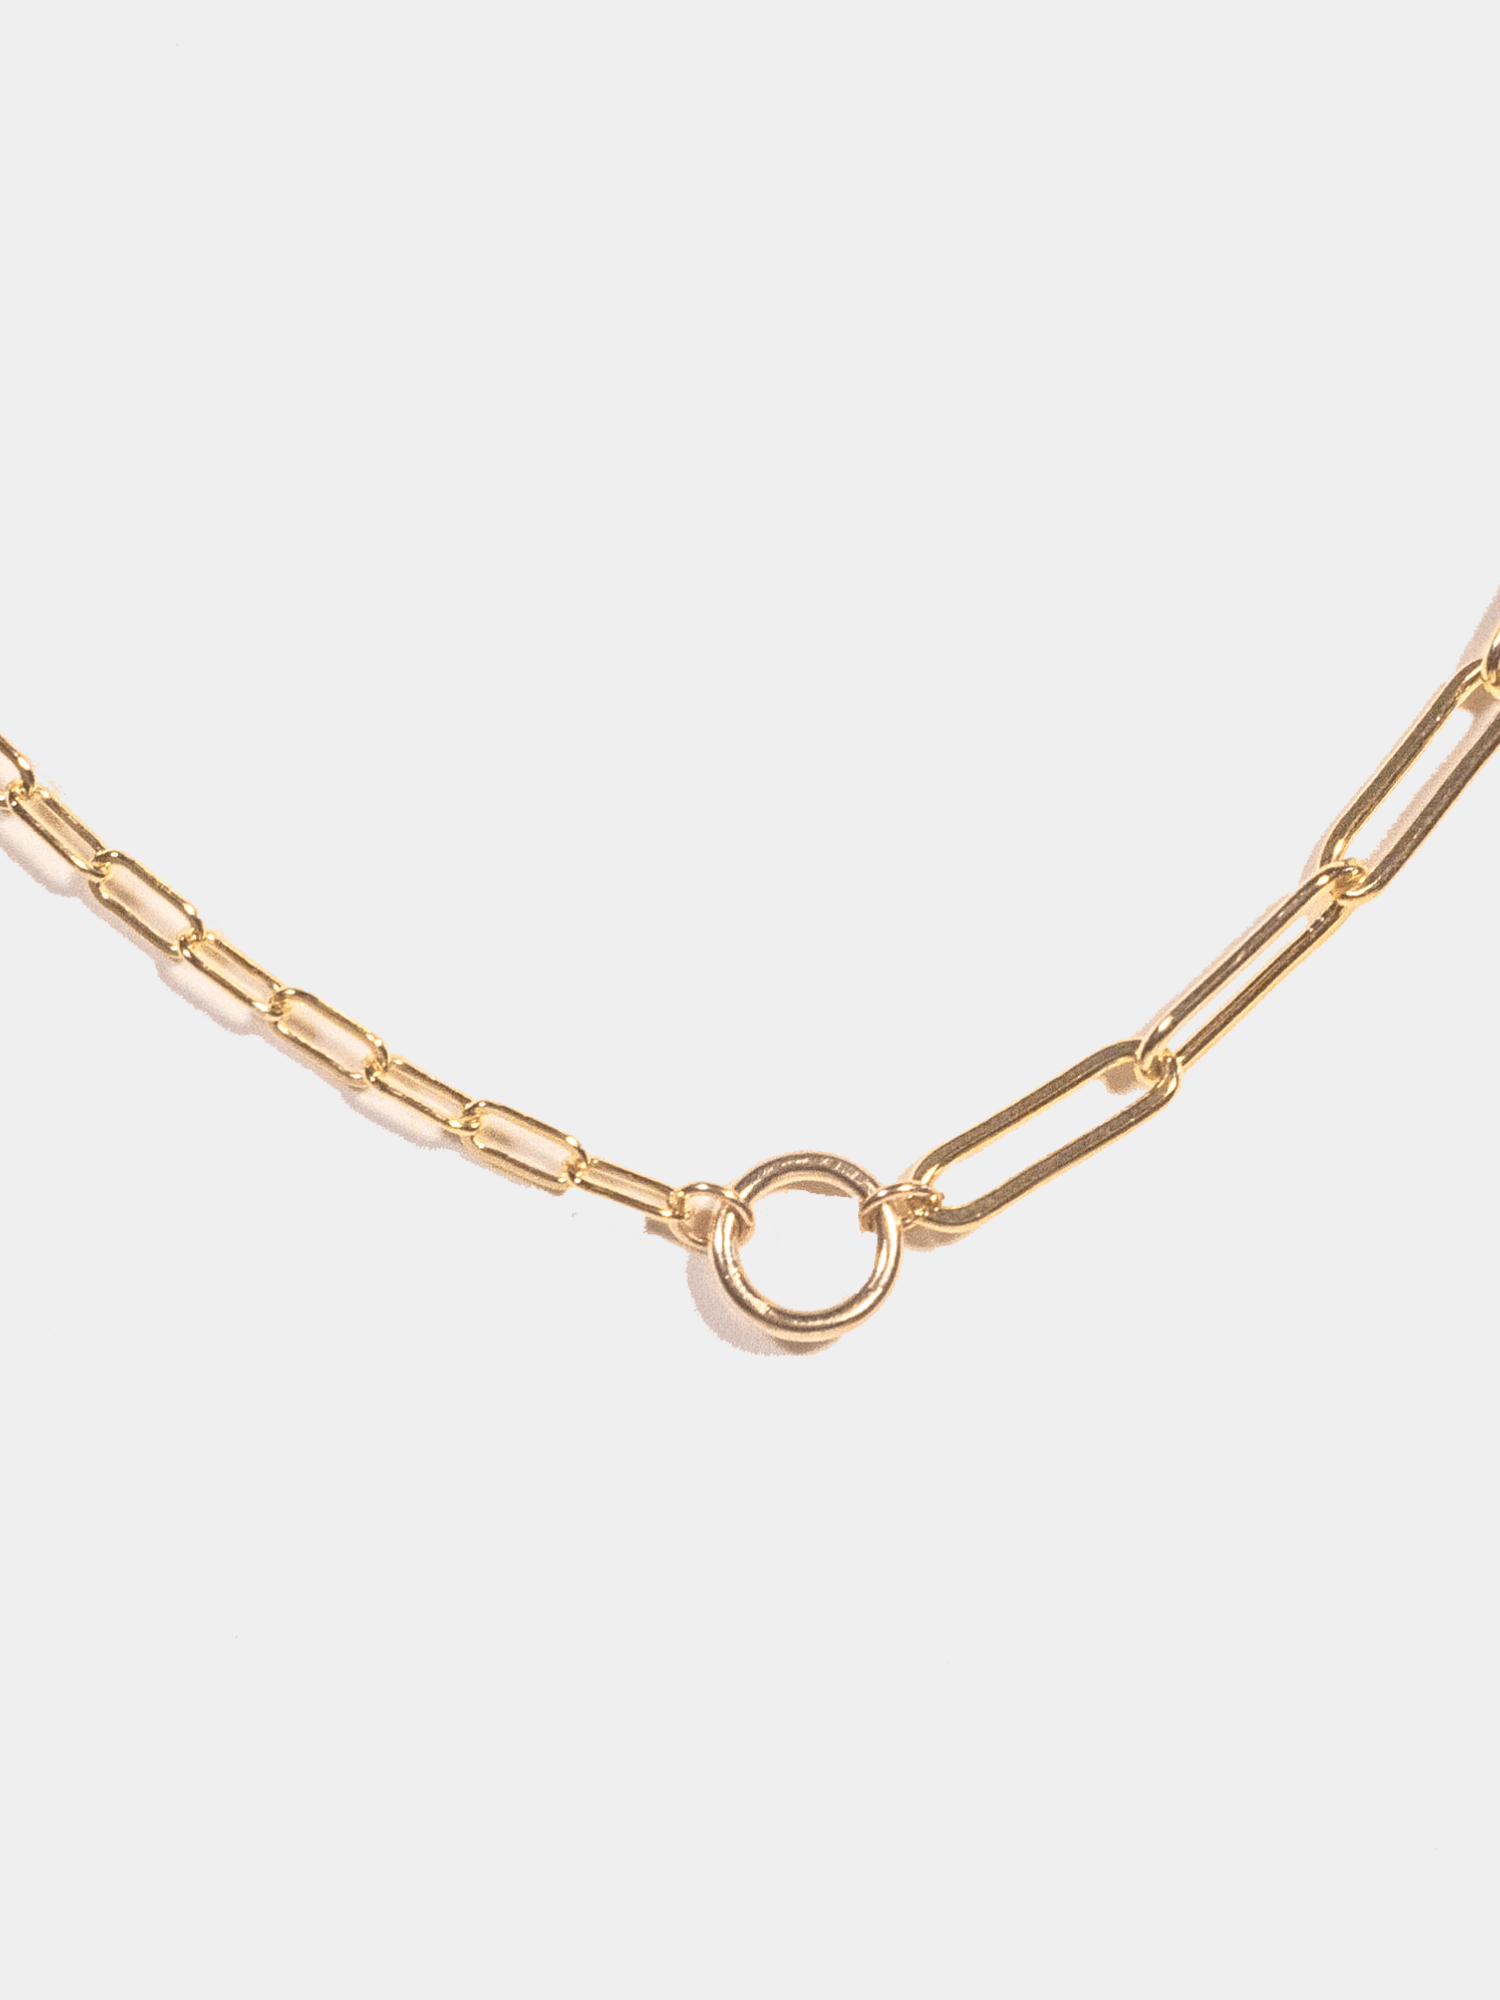 Shop OXB Necklace Gold Filled / 16" Paperclip Halfcourt Necklace